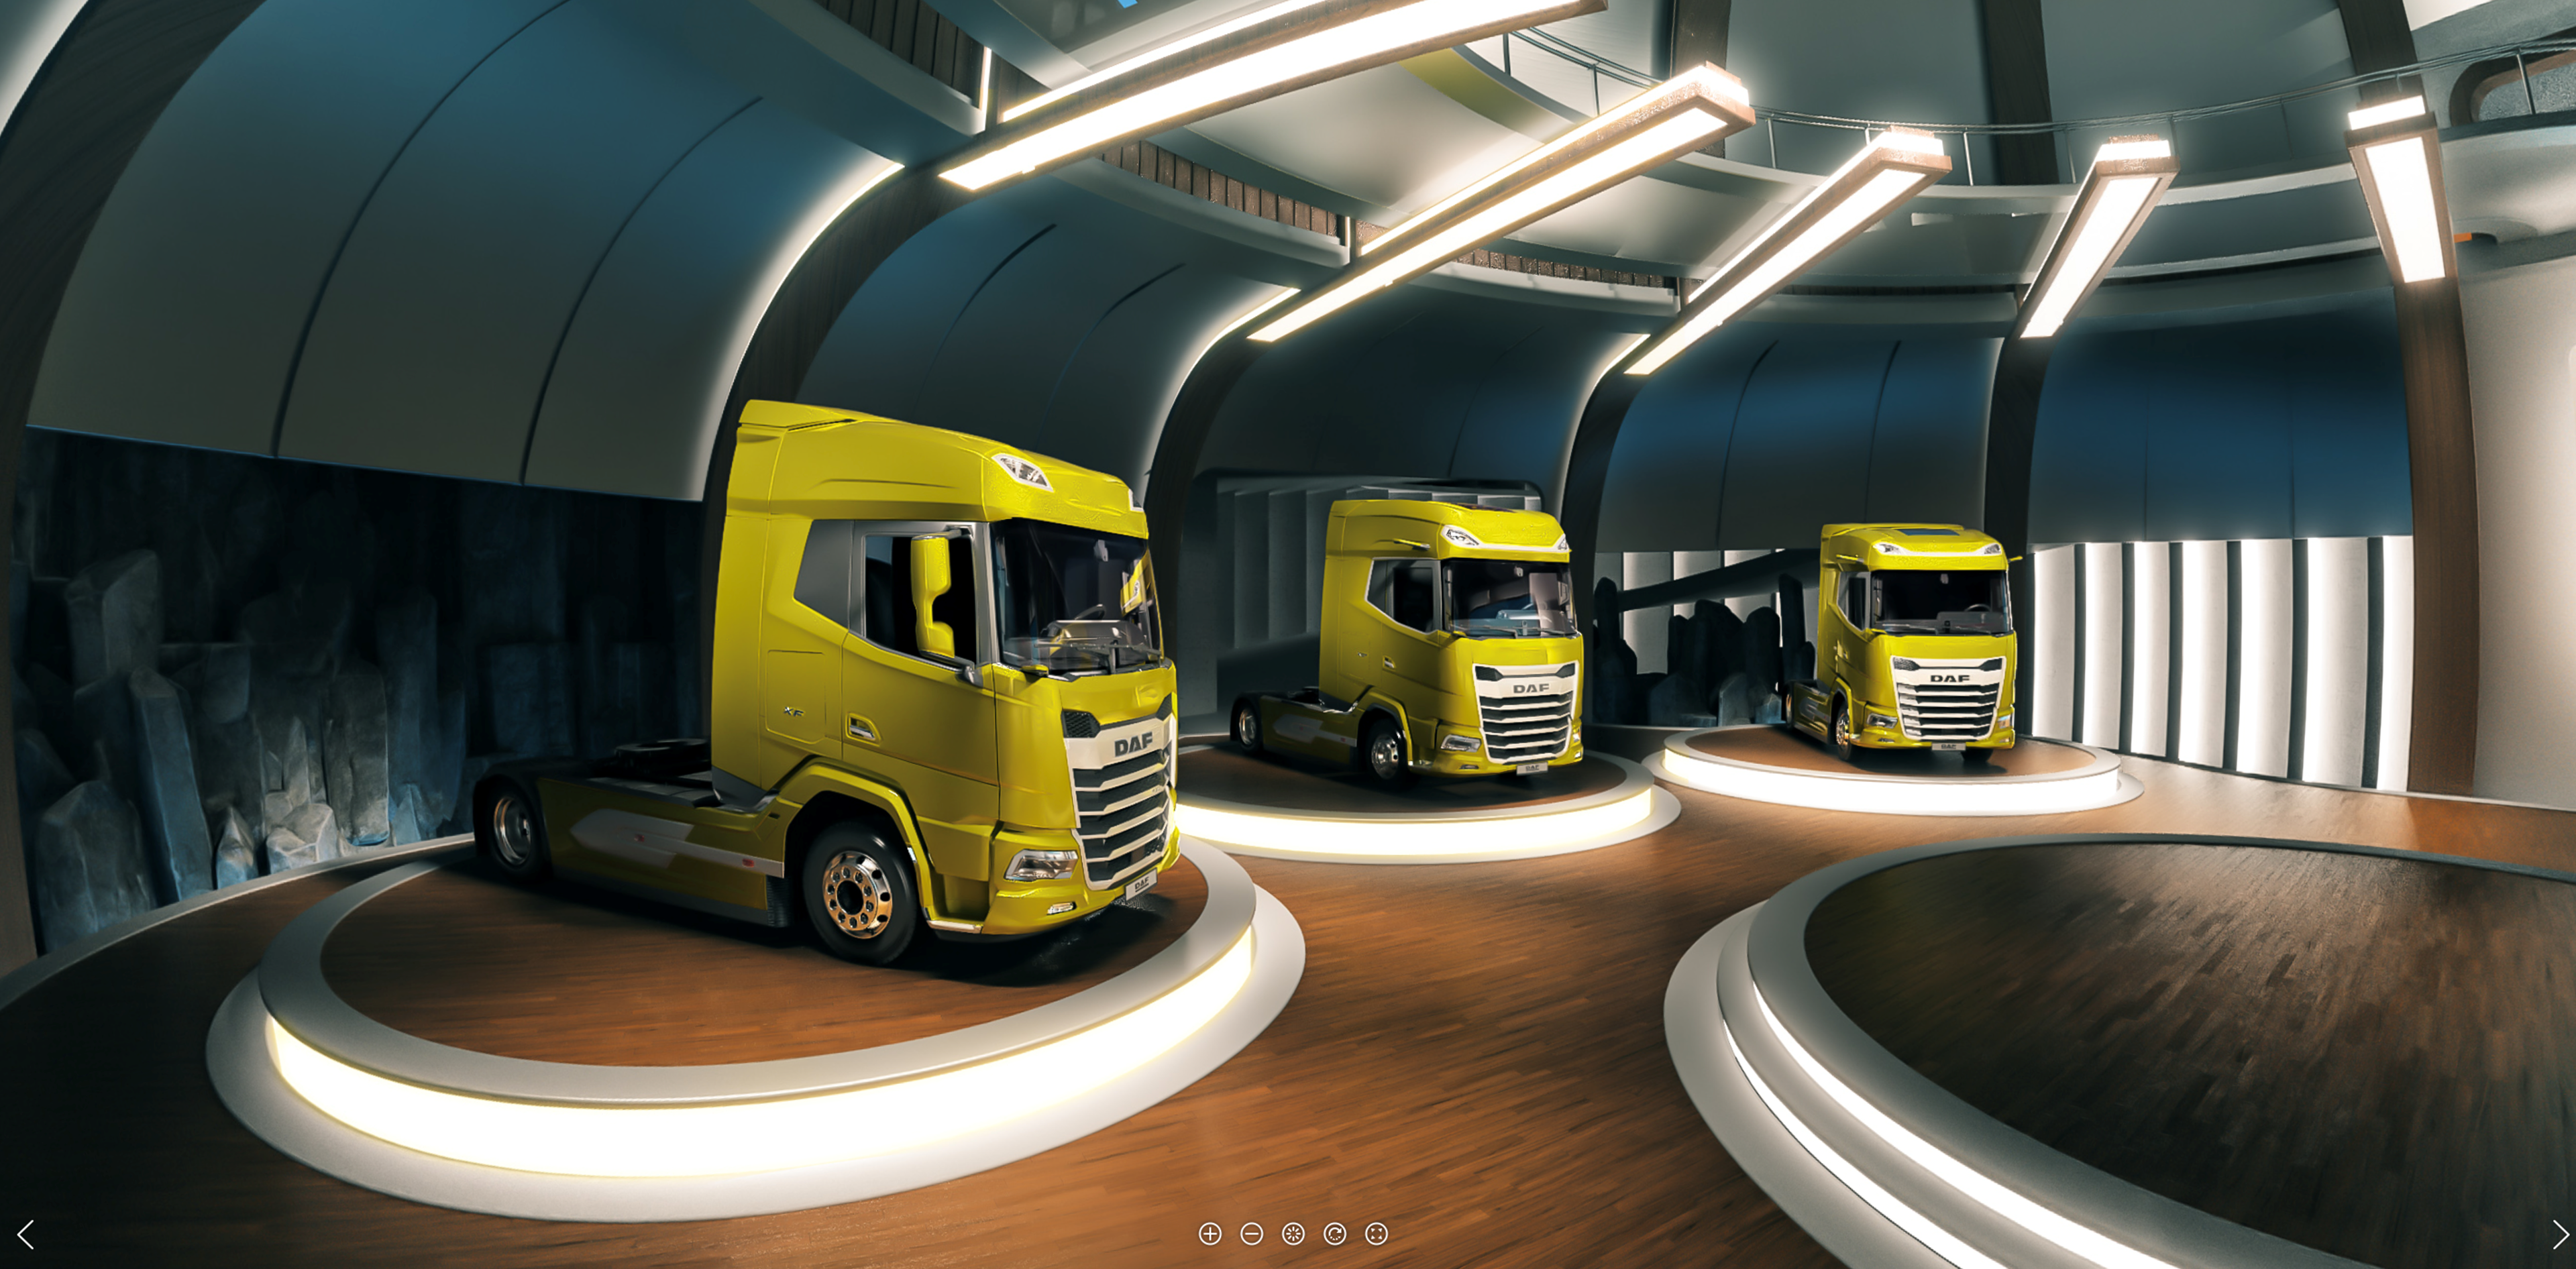 https://www.heavyquipmag.com/wp-content/uploads/2021/06/New-Generation-DAF-trucks-come-alive-digitally-02.png